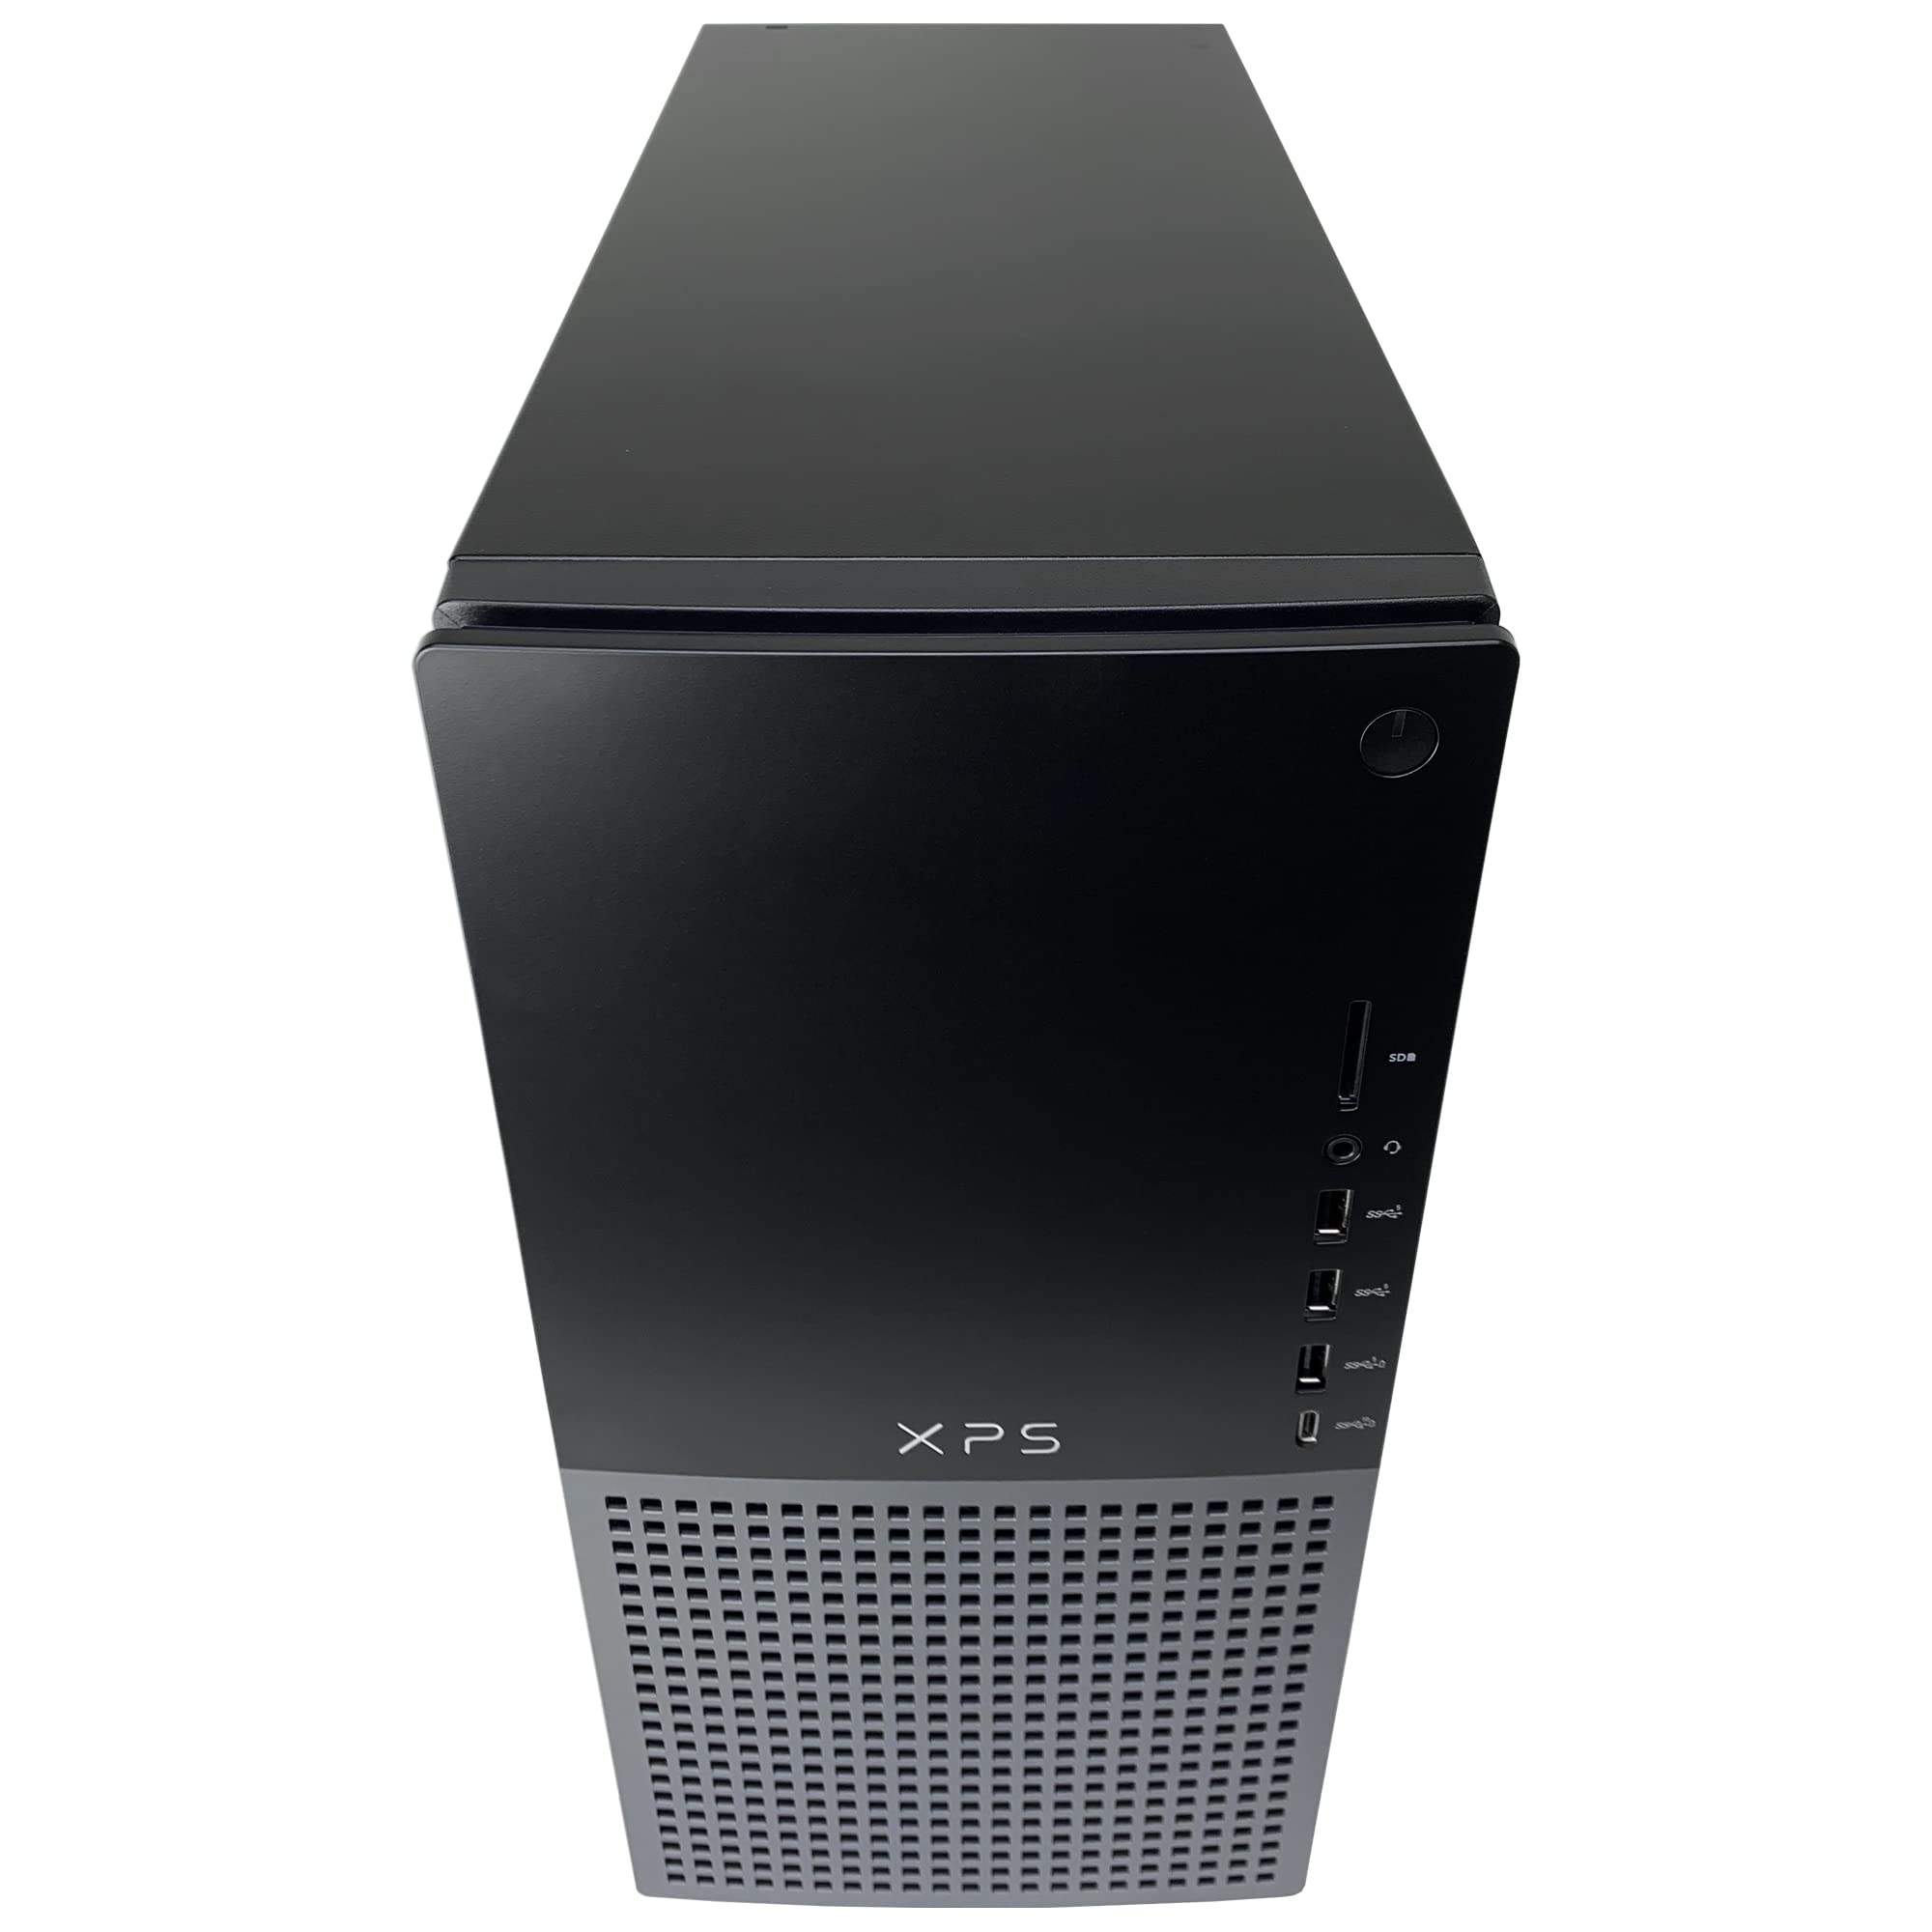 Dell XPS 8960 Gaming Desktop Computer - 13th Gen Intel Core i9-13900K 24-Core up to 5.80 GHz with Liquid Cooling, 64GB DDR5 RAM, 2TB NVMe SSD, GeForce RTX 3090 24GB GDDR6, Windows 11 Pro